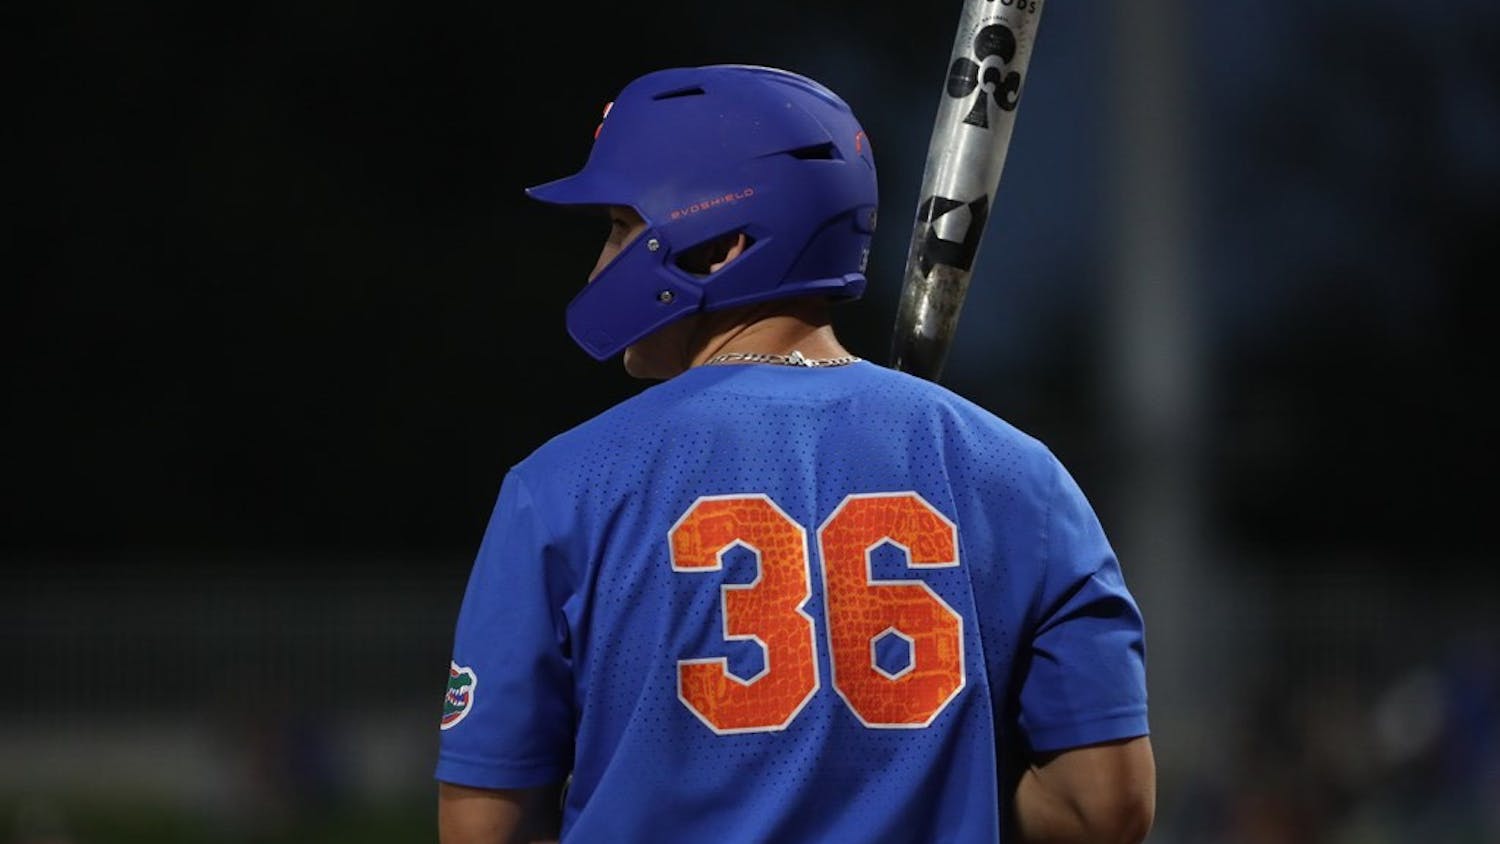 Sophomore Wyatt Langford delivered his 26th home run of the season Monday, tying Matt LaPorta for most homers in a single season from a UF batter. 